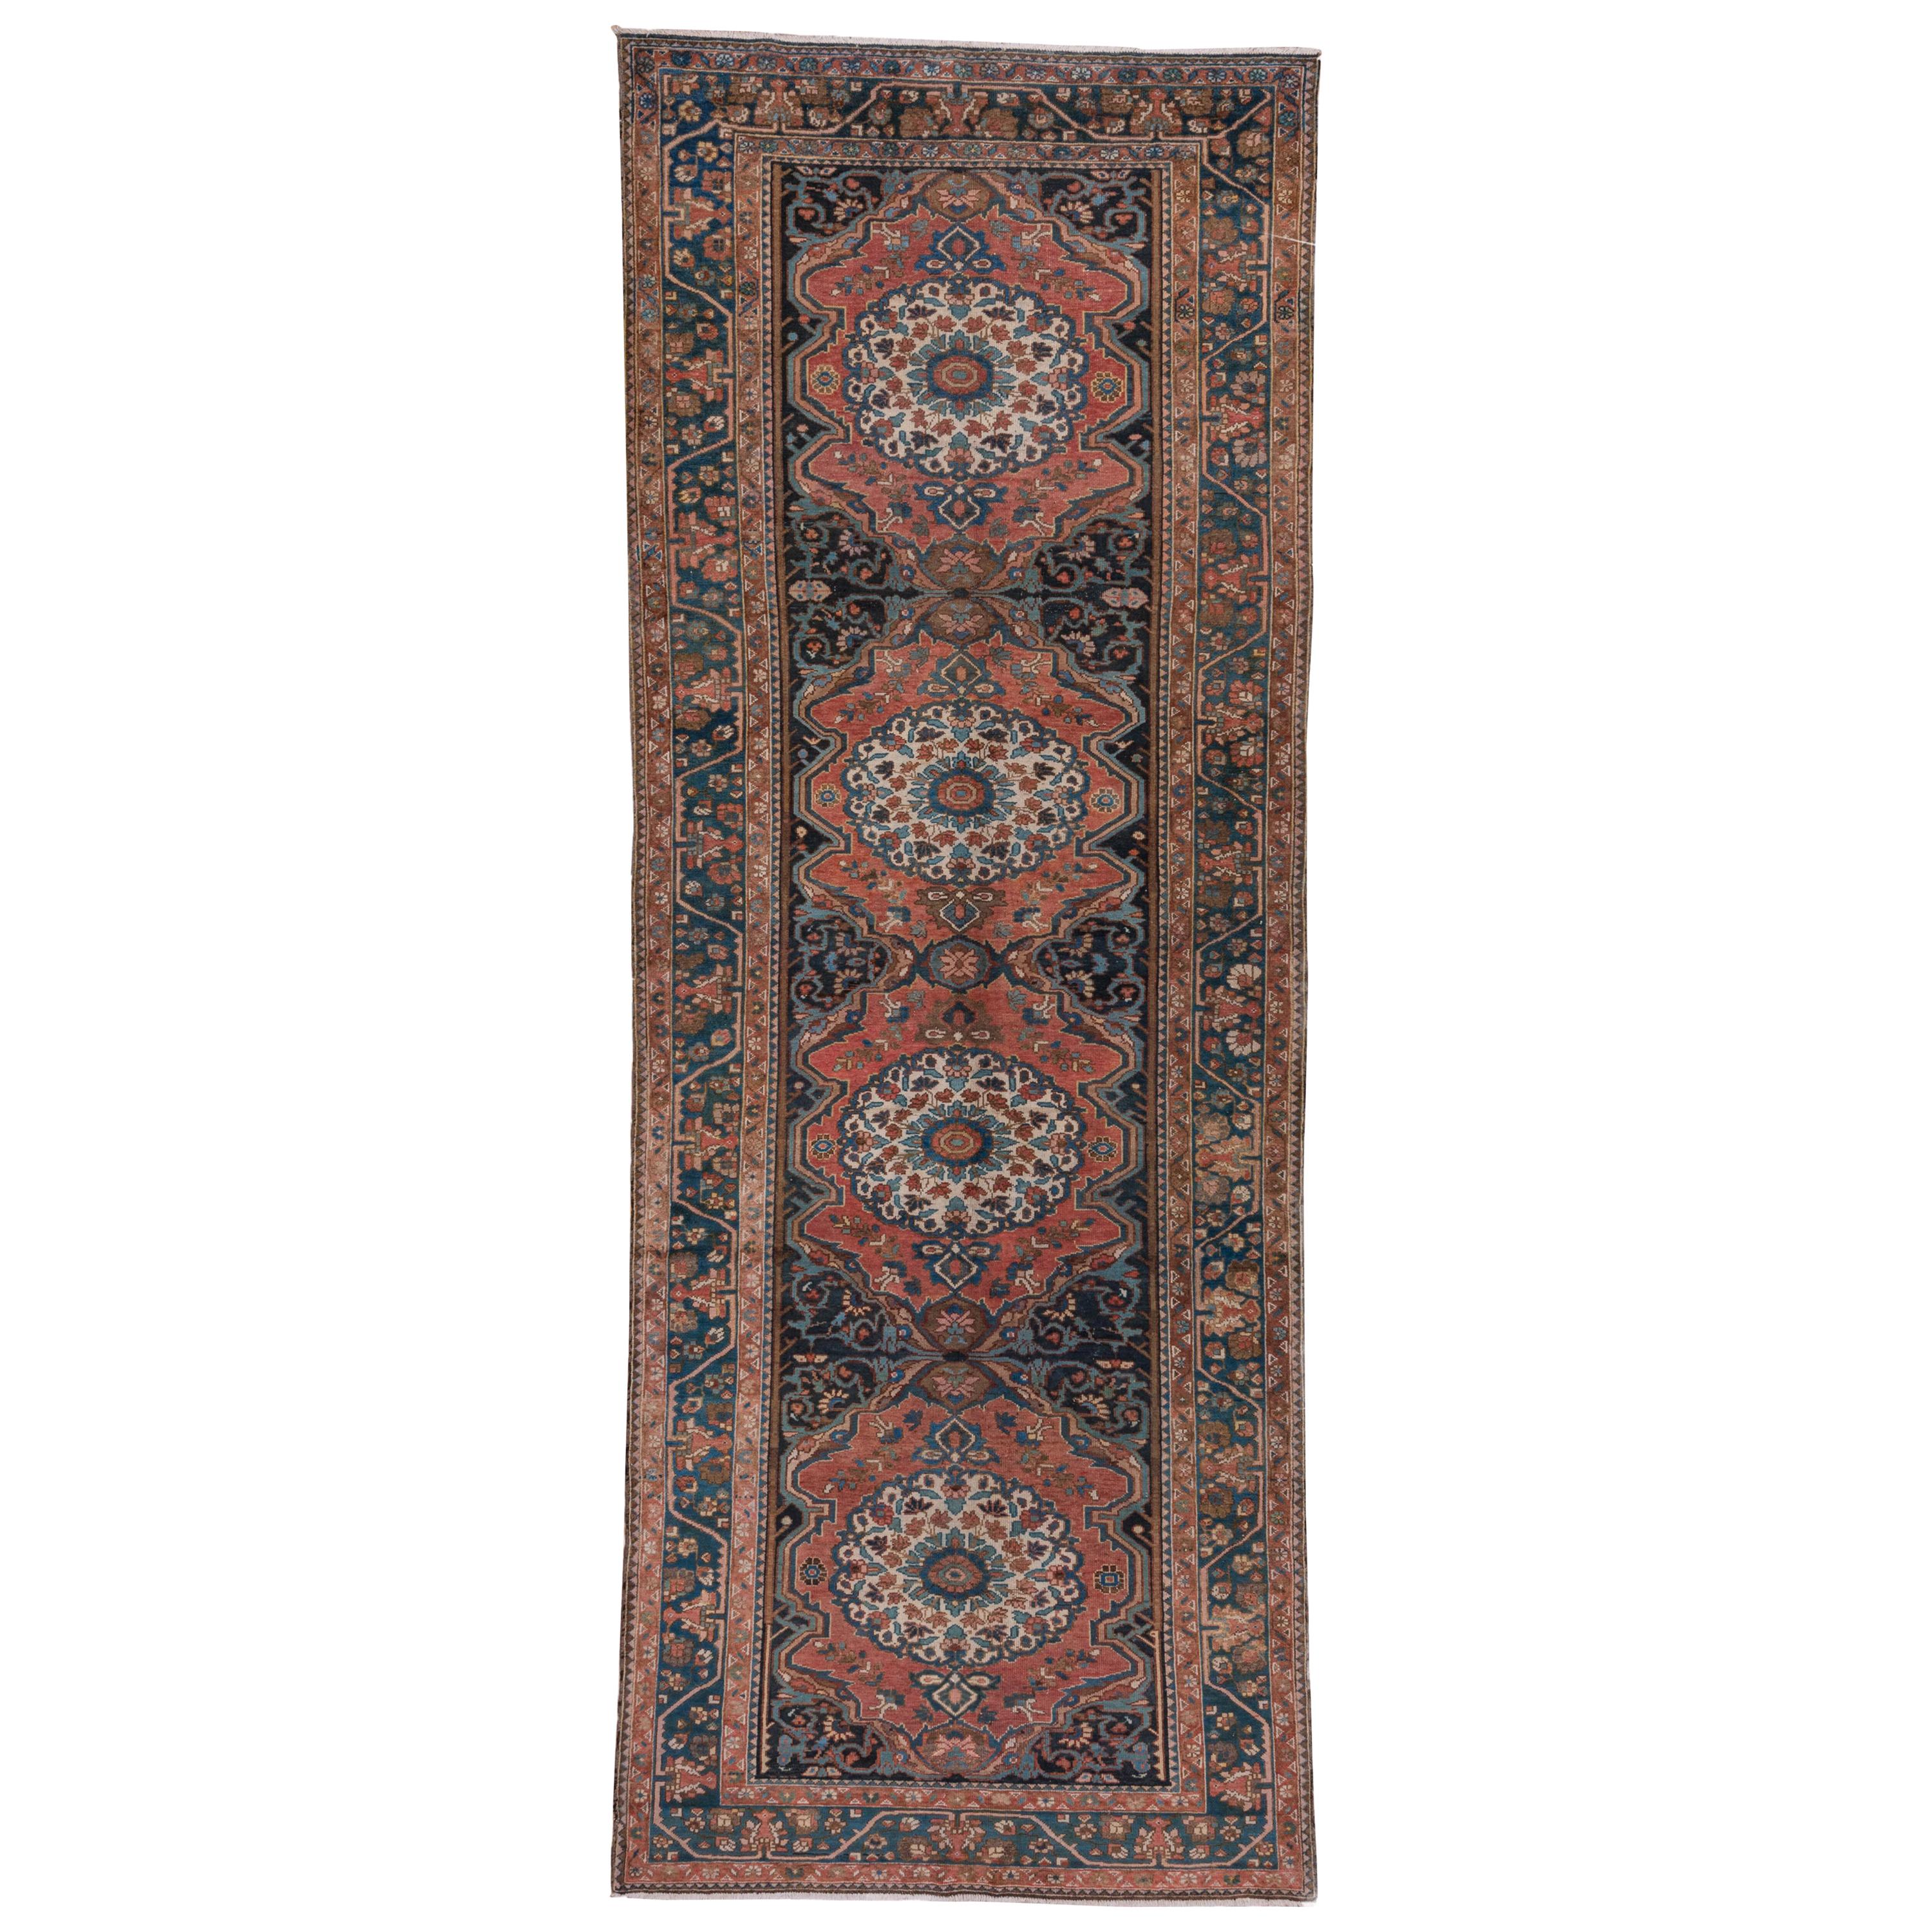 Antique Rustic Persian Bakhtiary Gallery Carpet, Rose and Blue Field For Sale